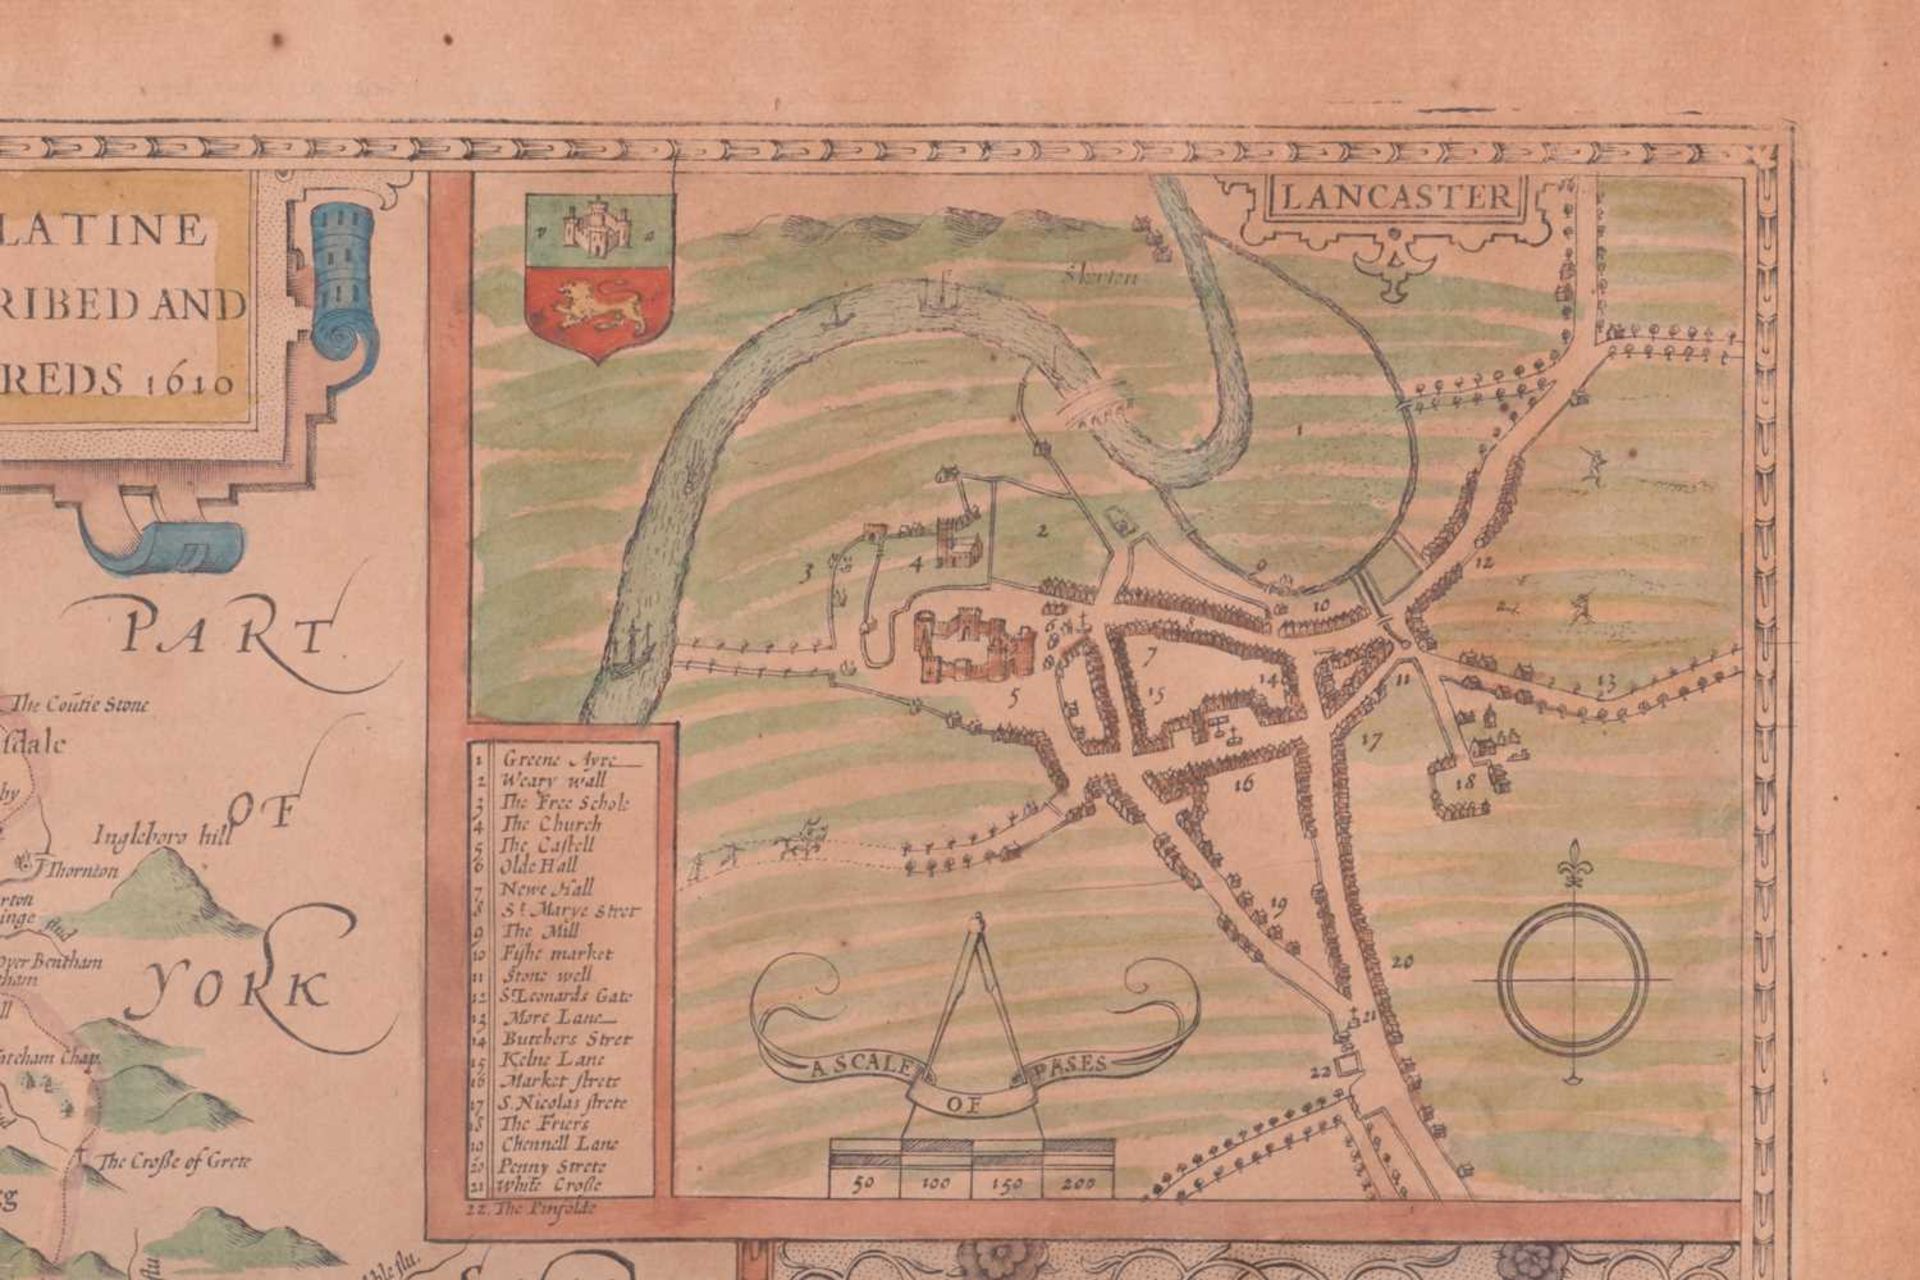 After John Speed, 'The Countie Palatine of Lancaster Described and Divided into Hundreds 1610', - Image 10 of 16